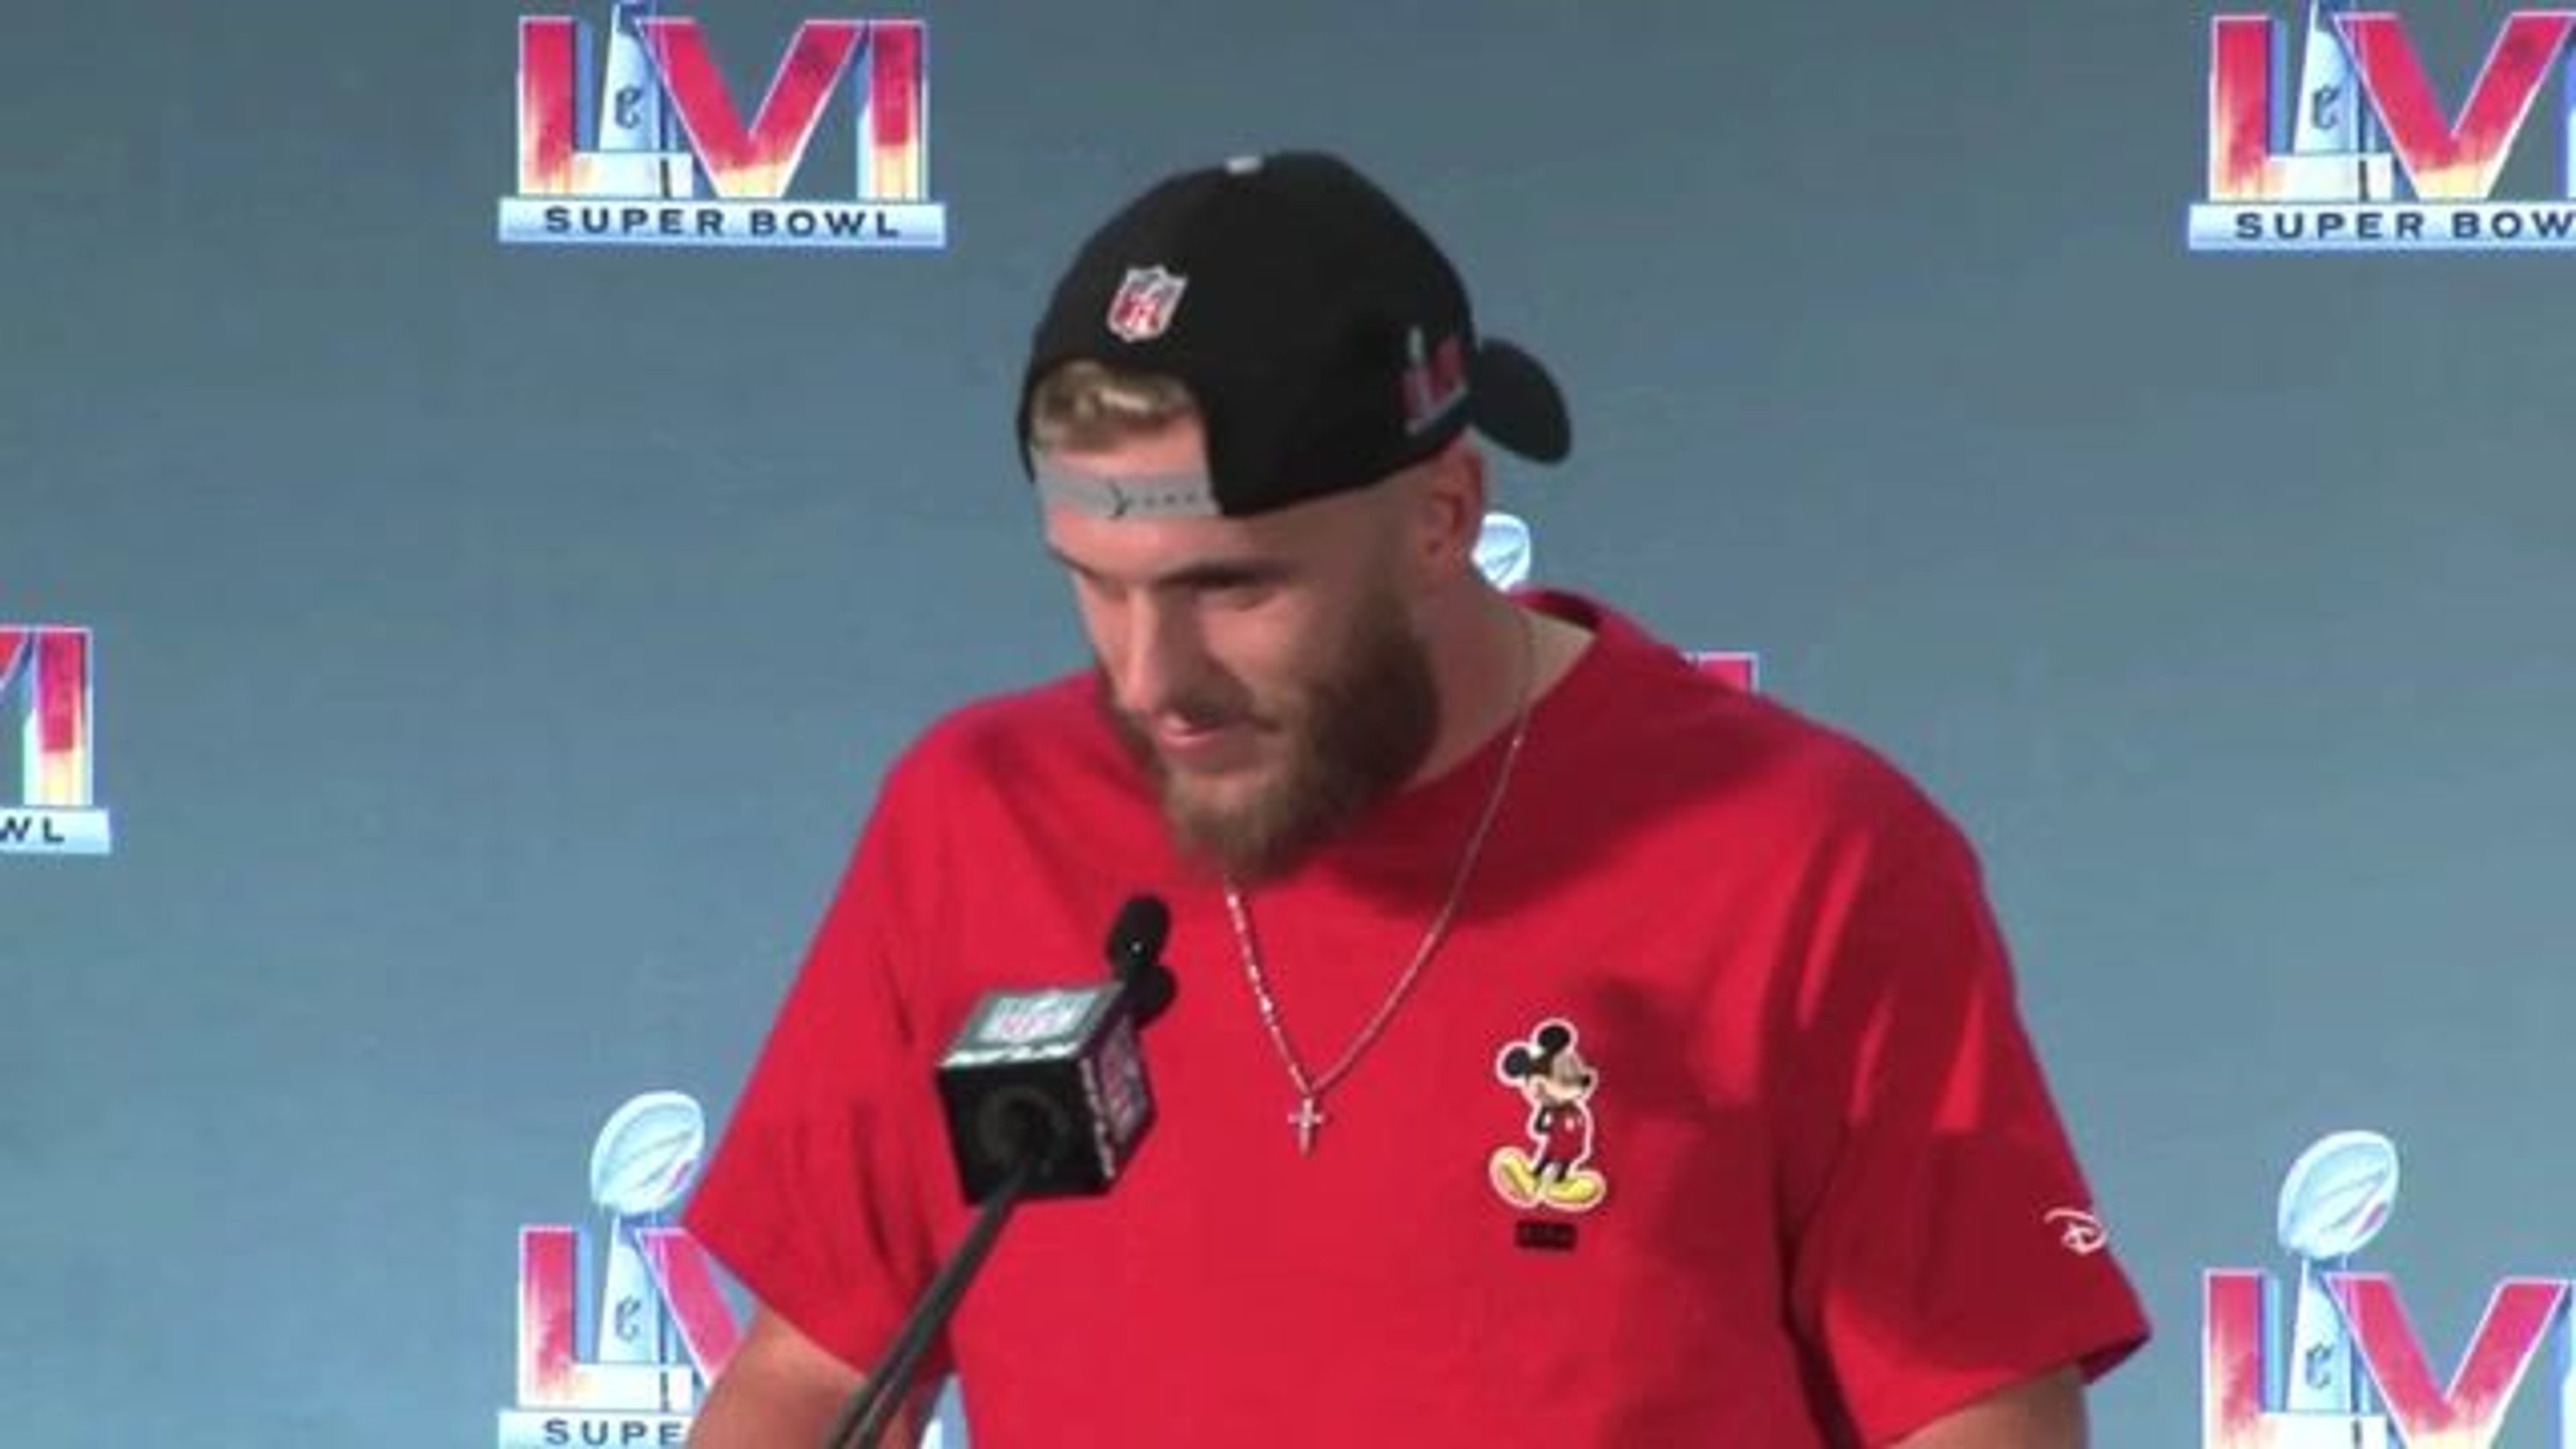 SB MVP Cooper Kupp asked if he's going to Disney World: “I think we're  gonna keep it in LA and head over to Disneyland.”